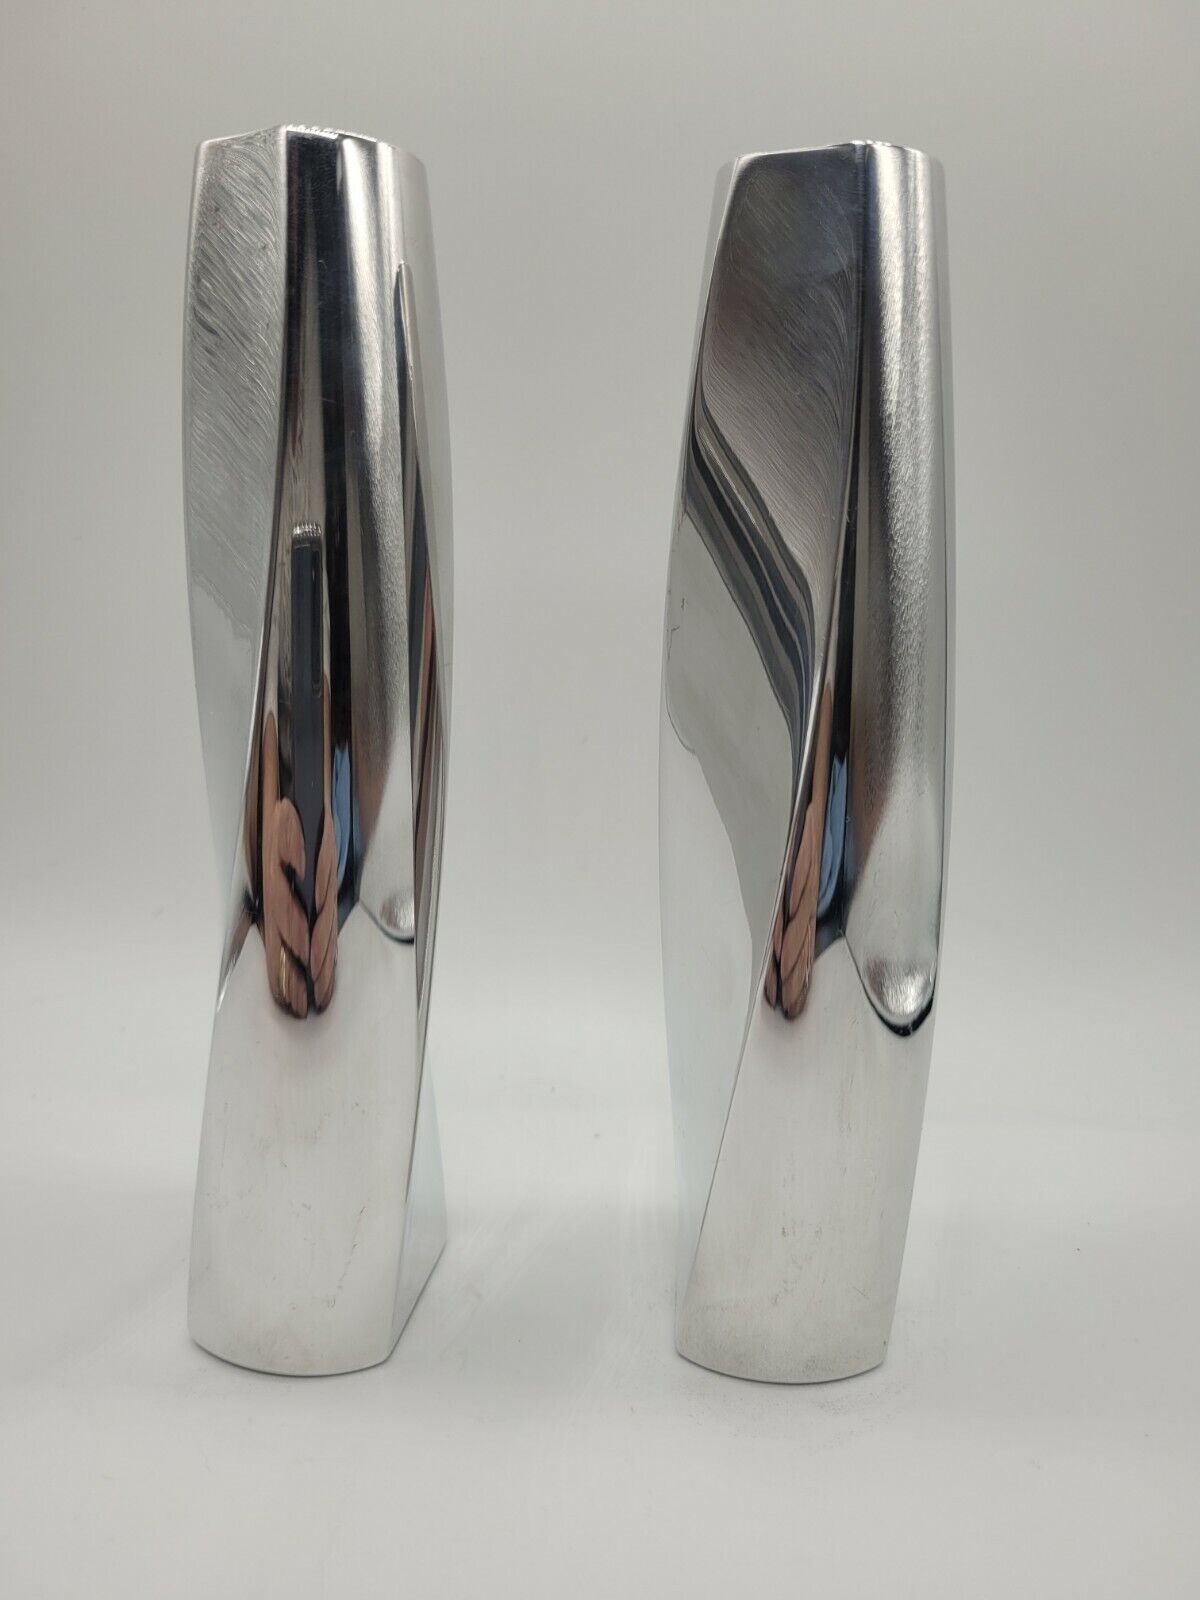 NAMBE Pair Twist Fred Bould 6236 Silver Candlesticks Holders 7” 2002 Pair Nambé NAMBE Twist Fred Bould 6236 - фотография #4